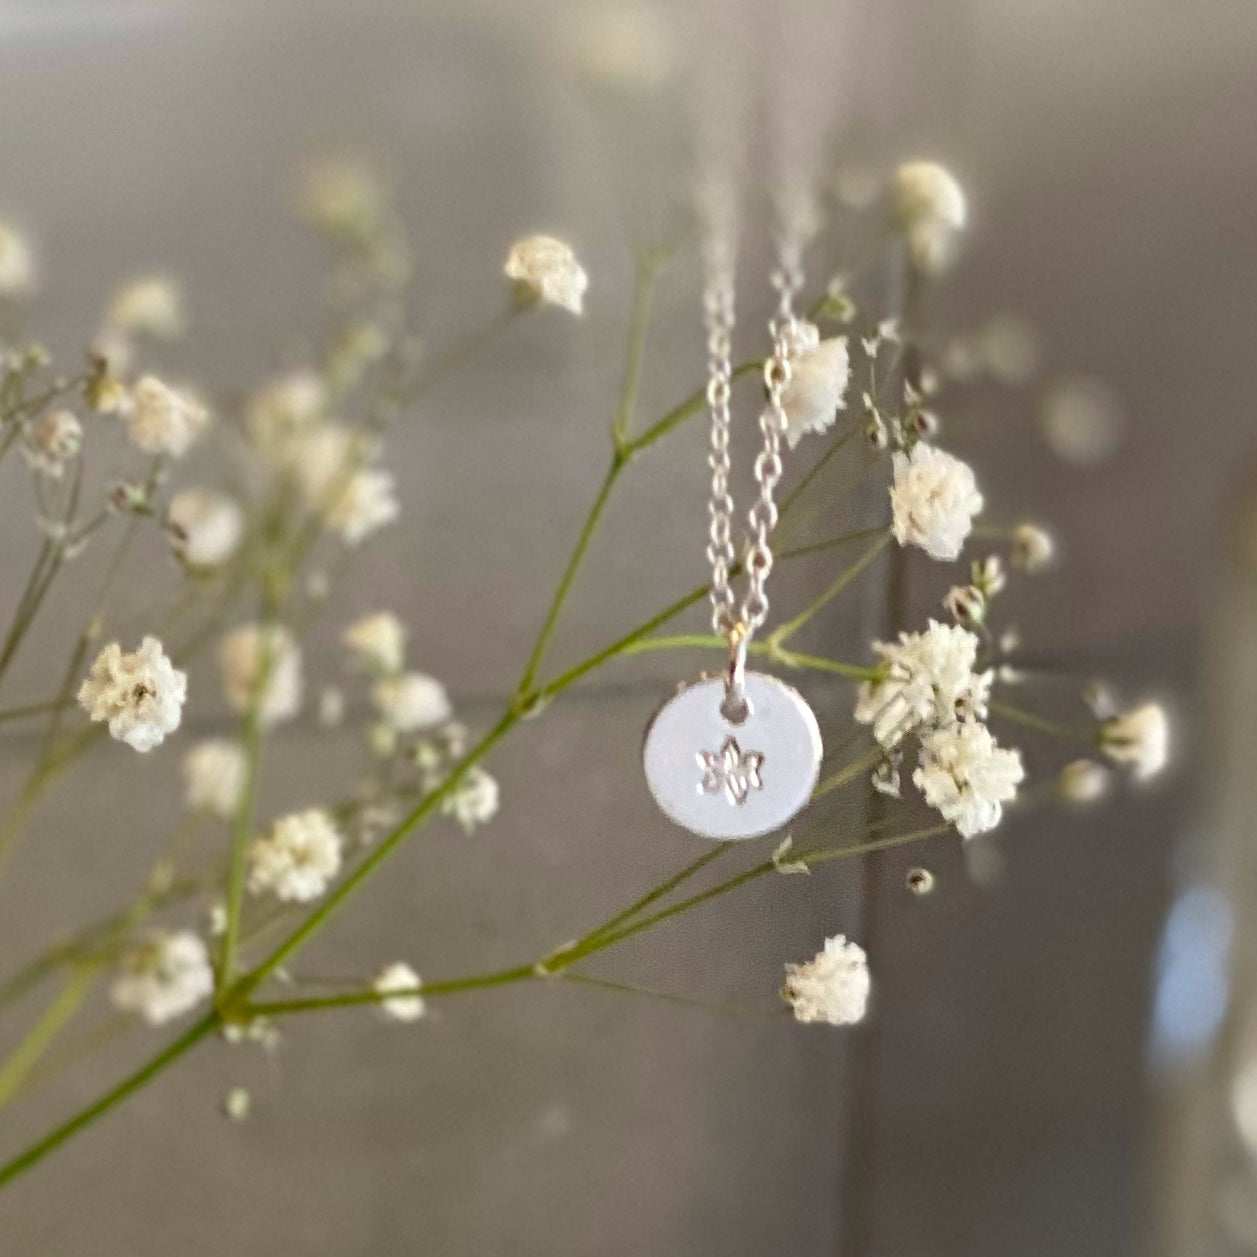 May - Hawthorn Birth Flower Necklace